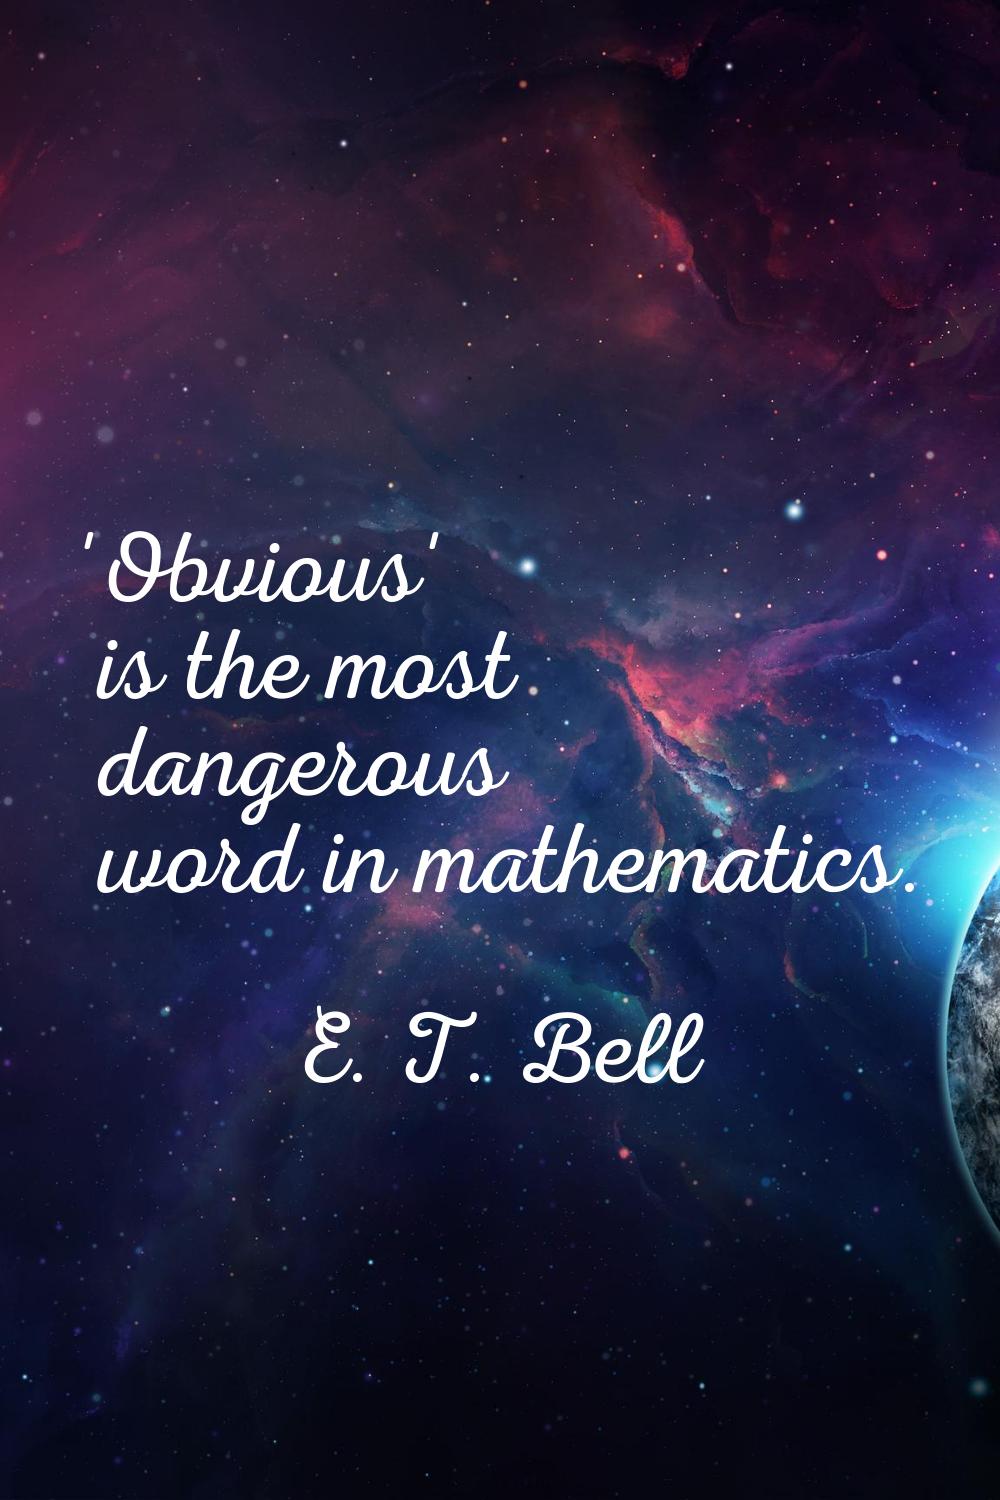 'Obvious' is the most dangerous word in mathematics.